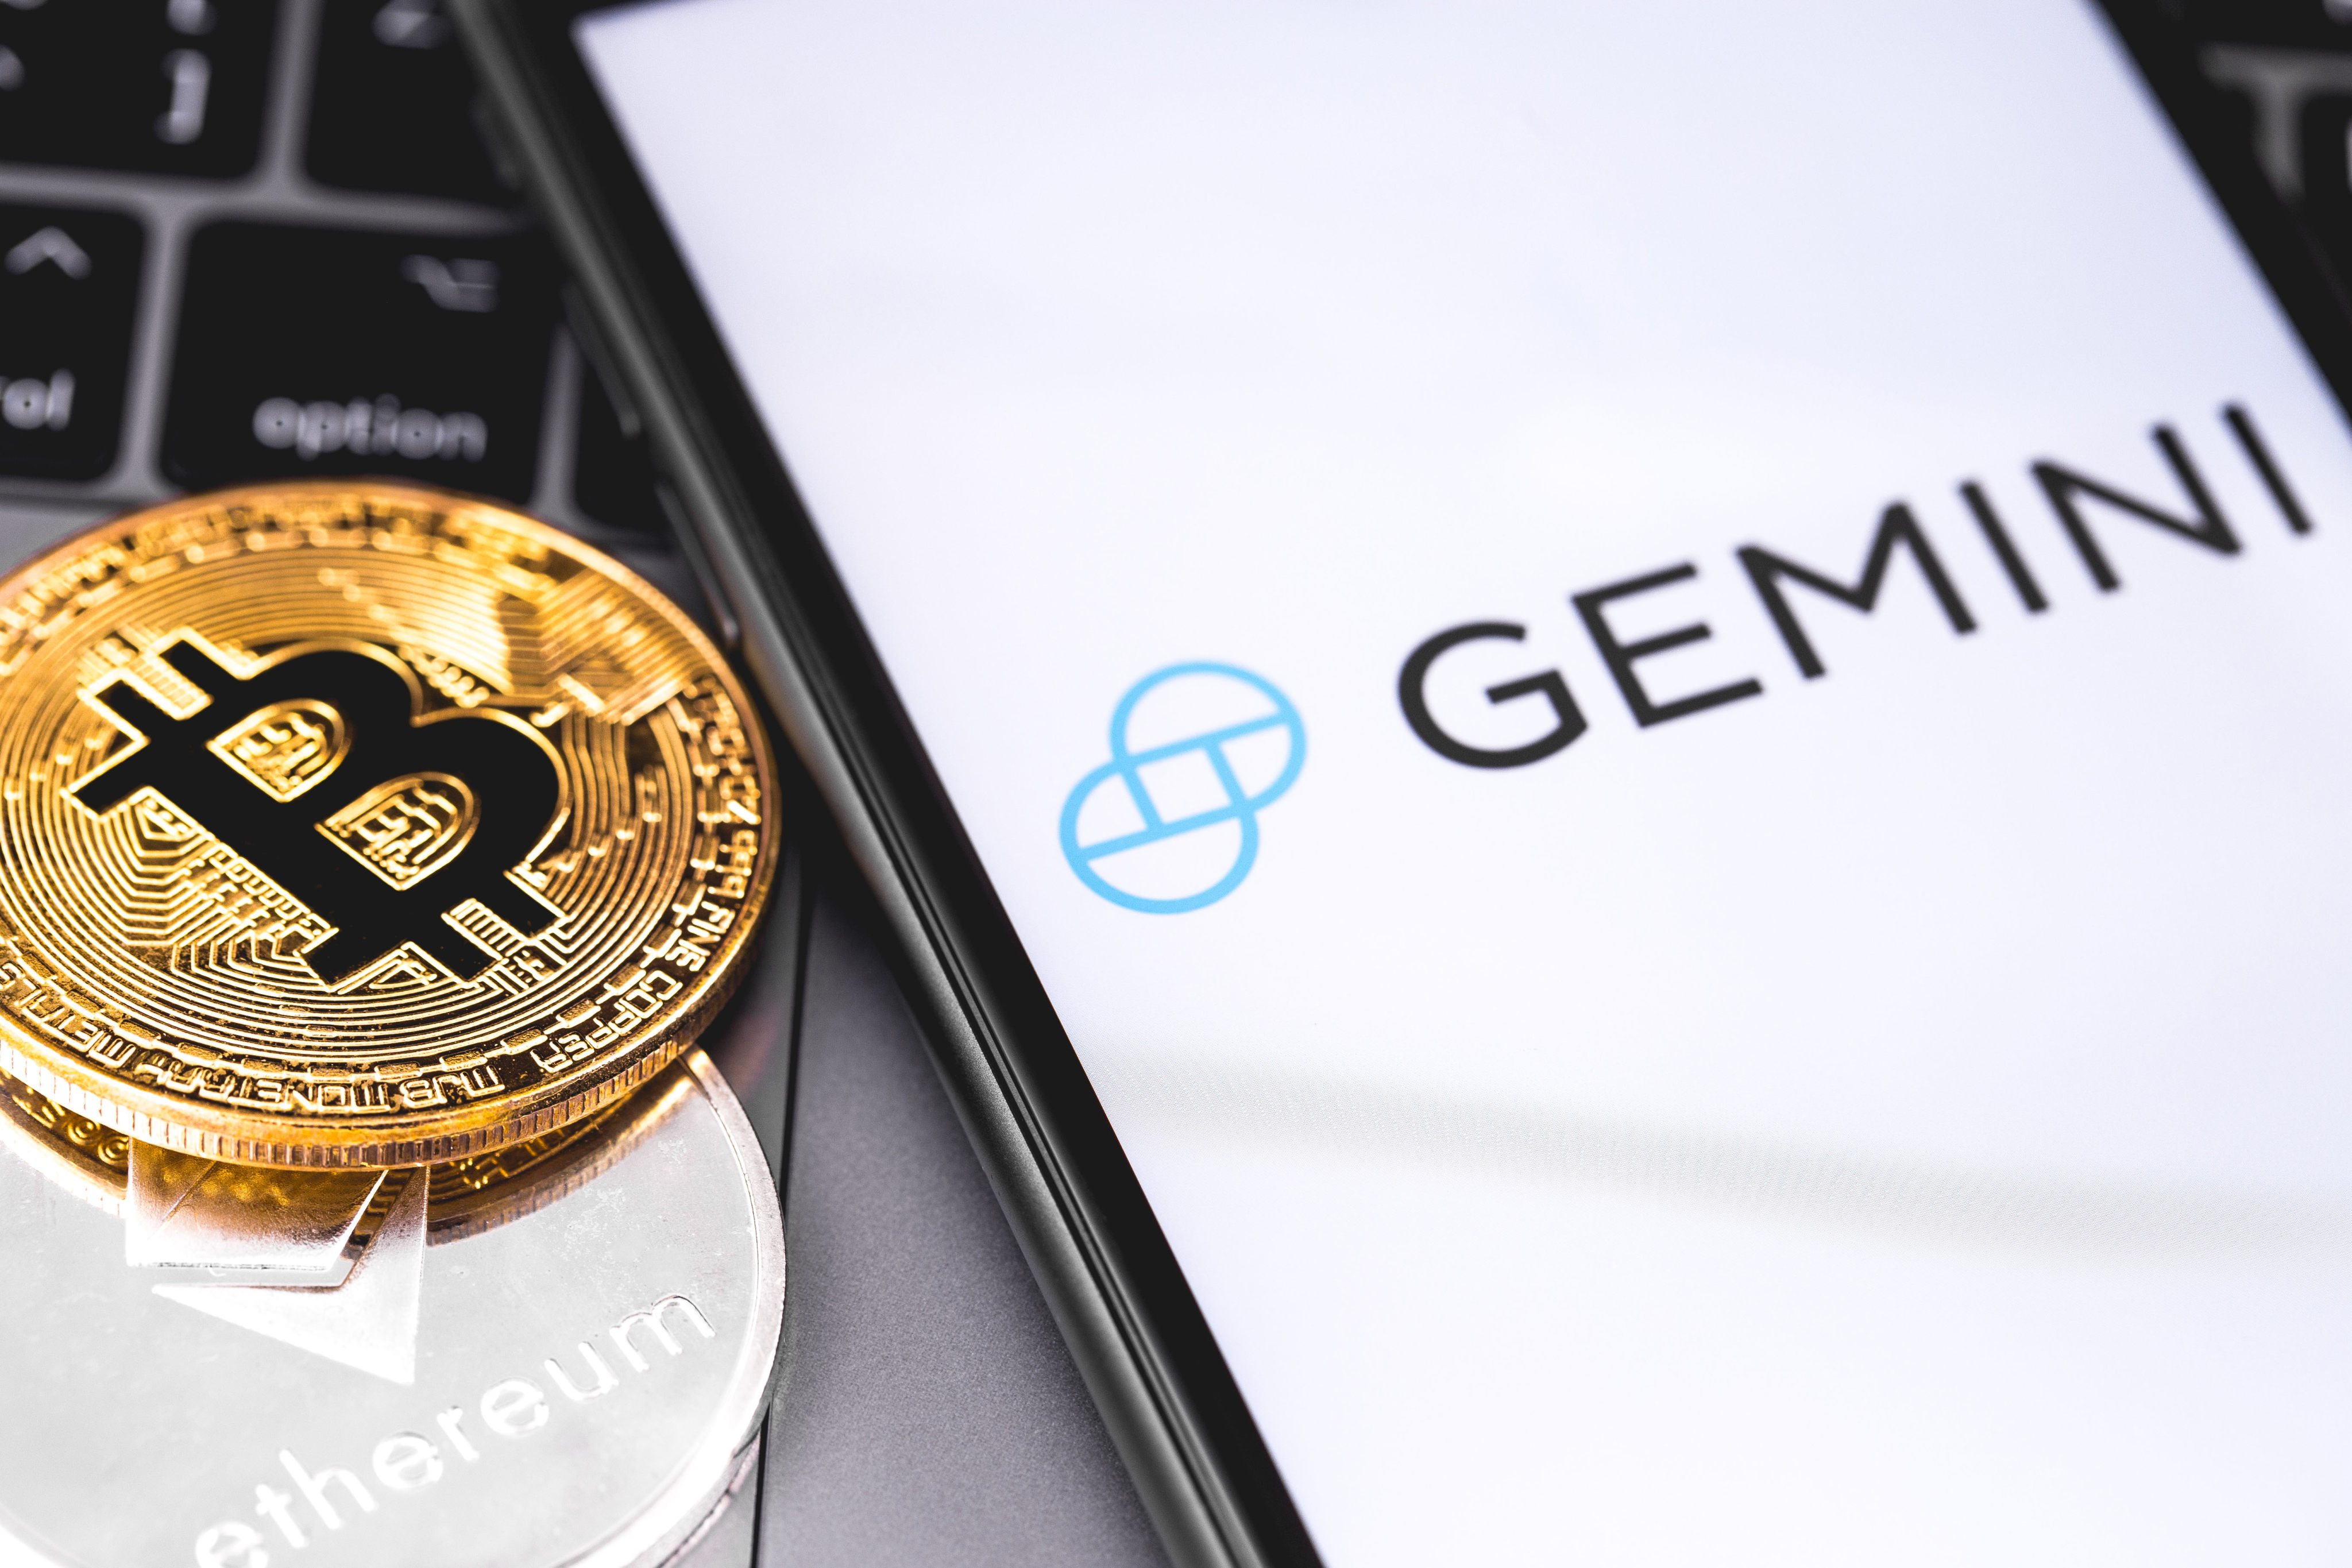 The logo of New York-based cryptocurrency exchange Gemini seen on a smartphone screen on February 13, 2019. Gemini is one of multiple exchanges that is now offering “staking as a service” to retail investors in Hong Kong. Photo: Shutterstock